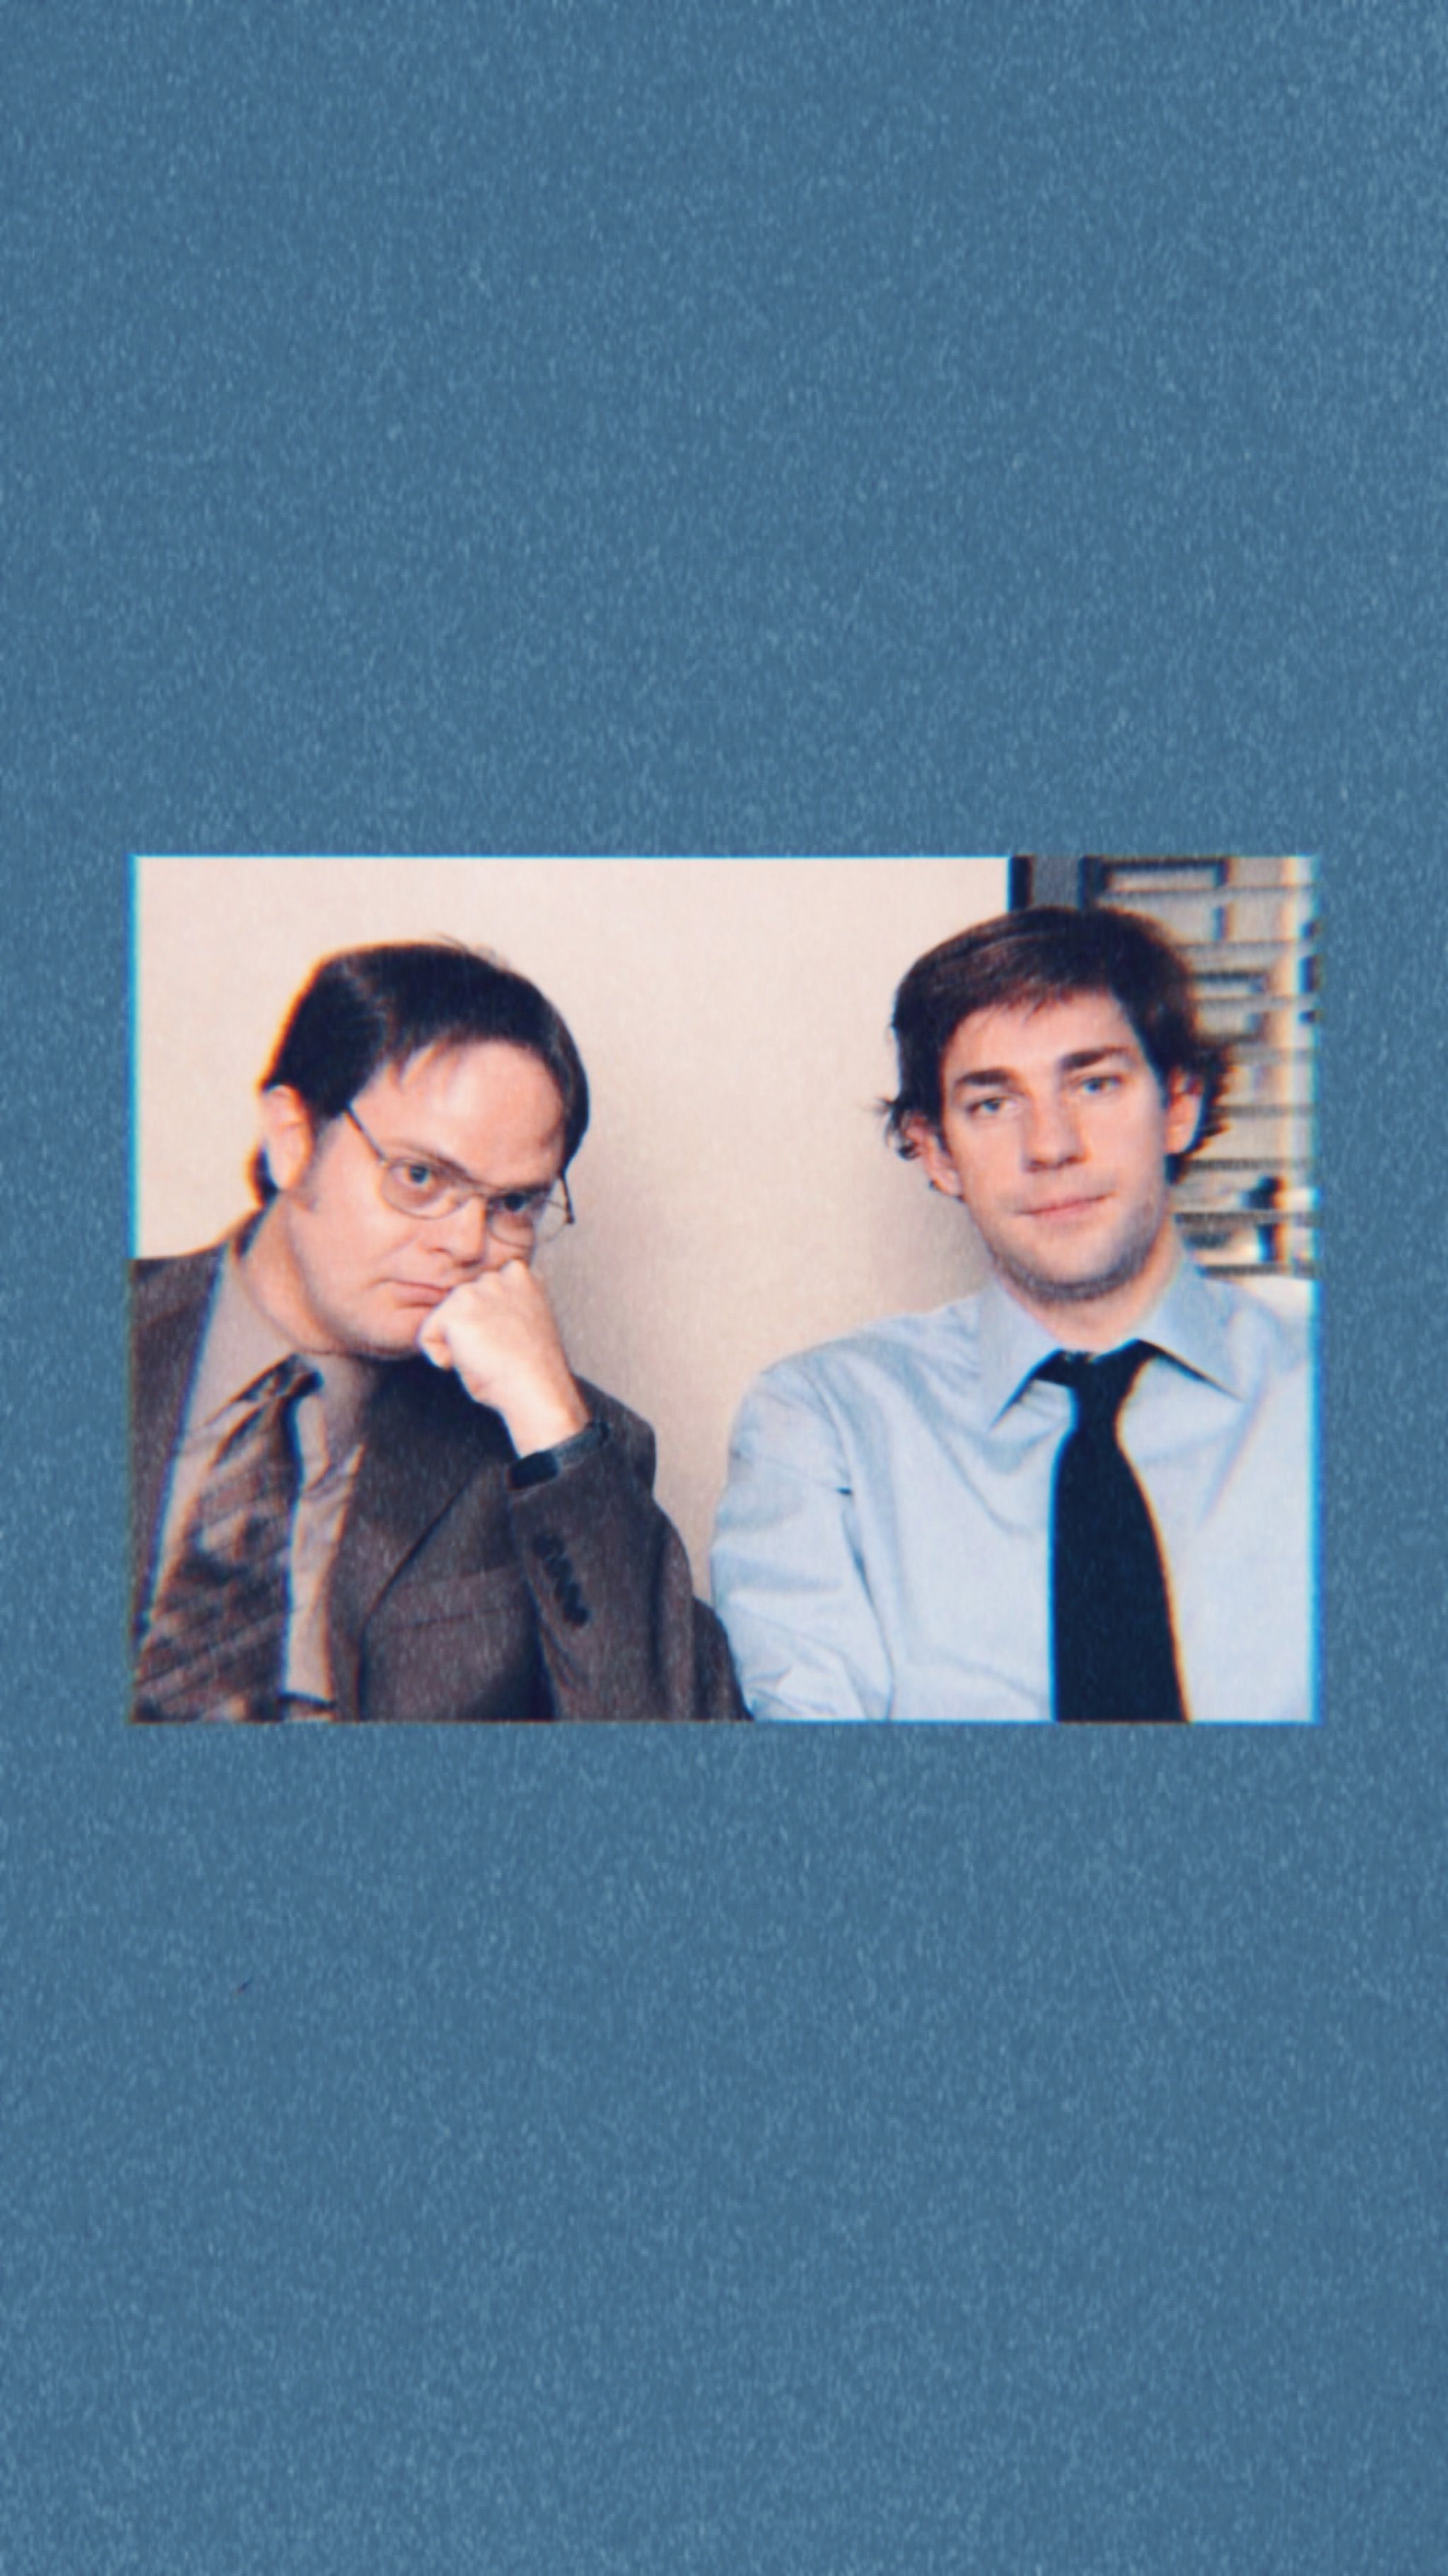 The Office Wallpaper. Office wallpaper, The office show, The office